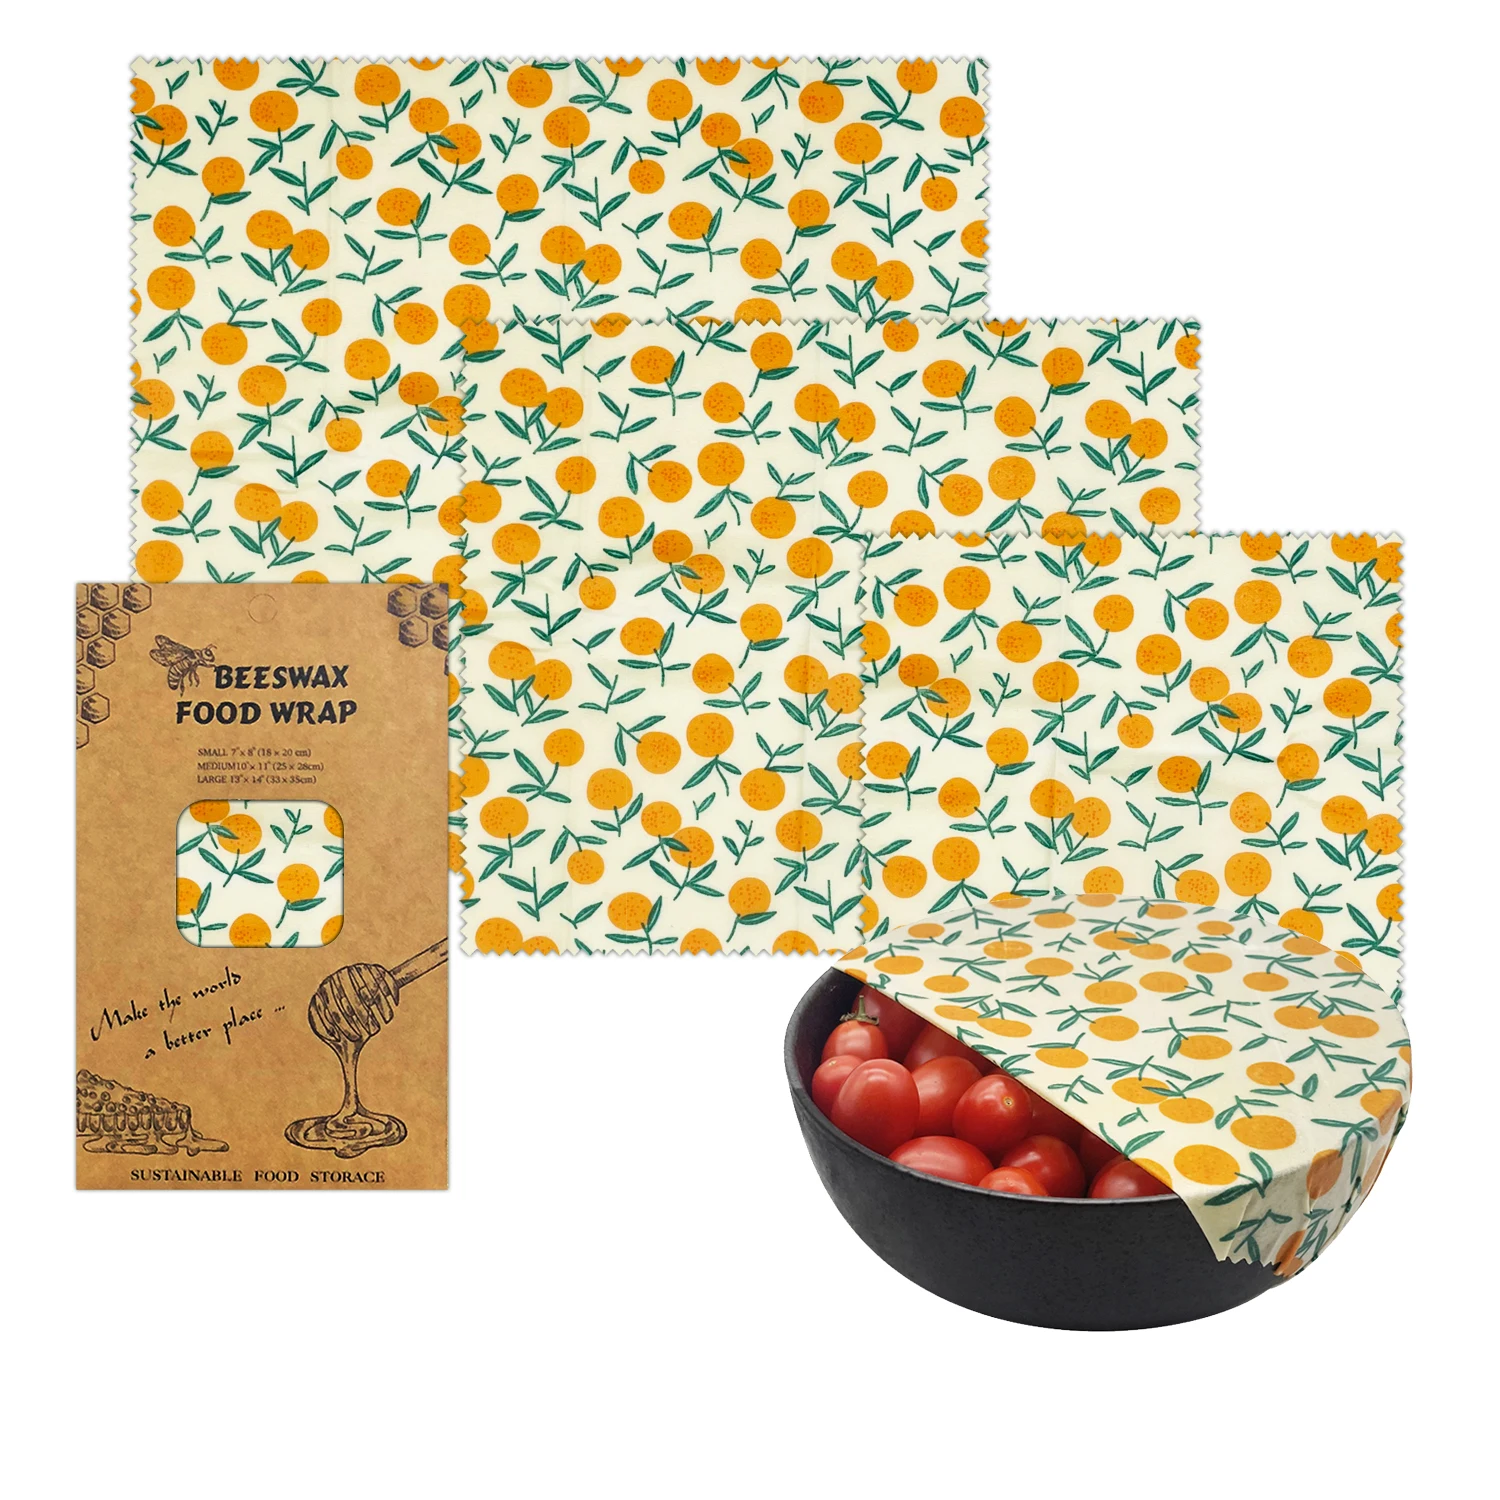 

Best Selling Sandwich Lunch Food Fresh-keeping Cloth Pack Wrap Natural Biodegradable Beeswax Wrap Reusable Beeswax Food Wraps